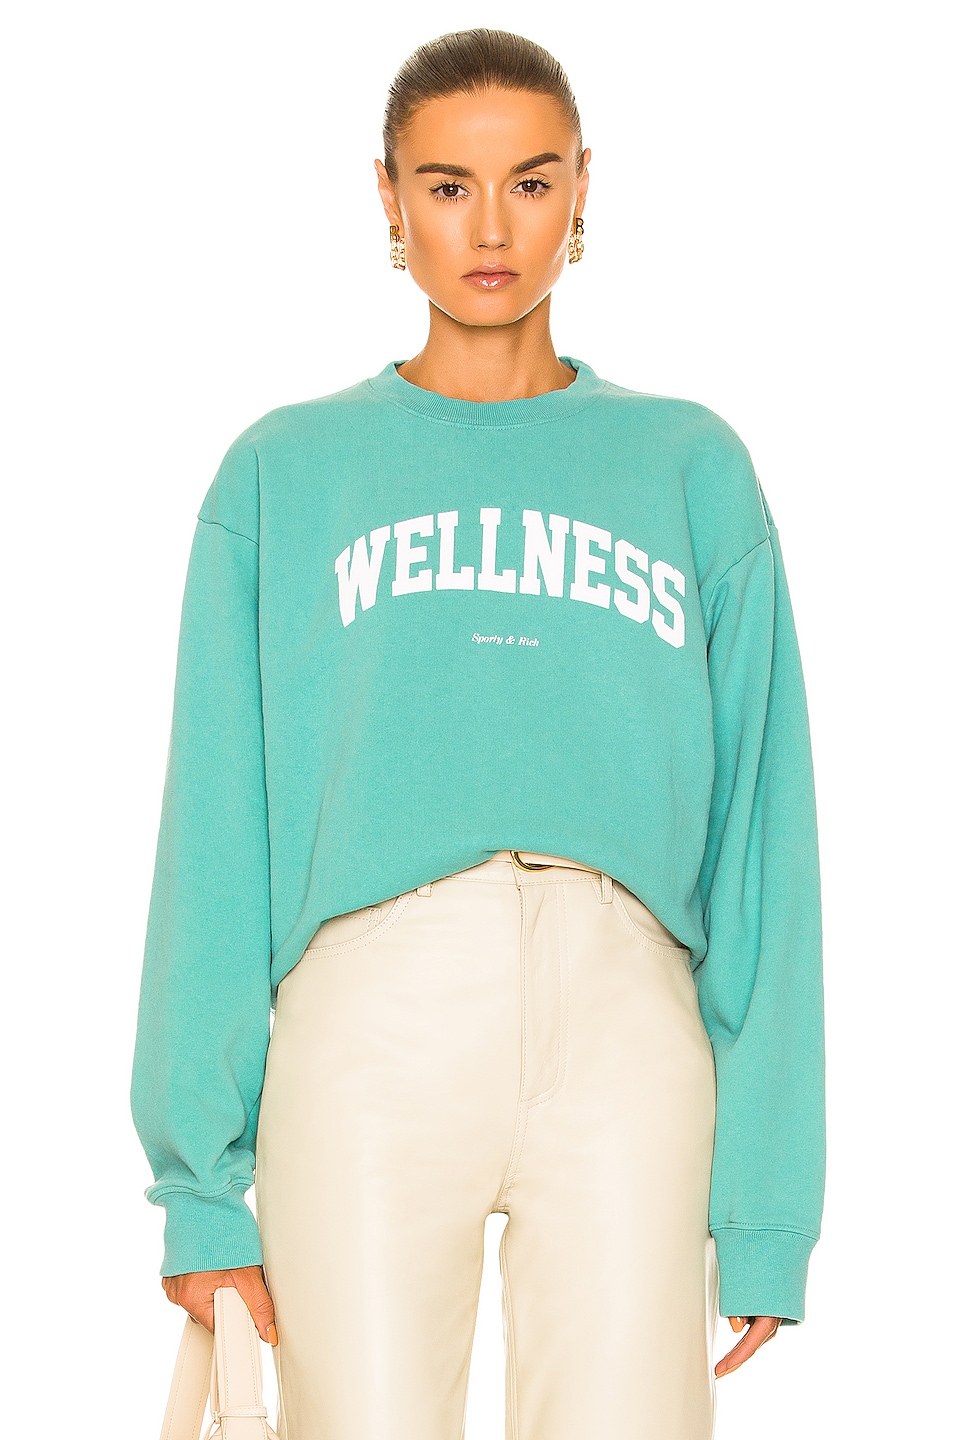 Image 1 of Sporty & Rich Wellness Ivy Crewneck Sweatshirt in Faded Teal & White